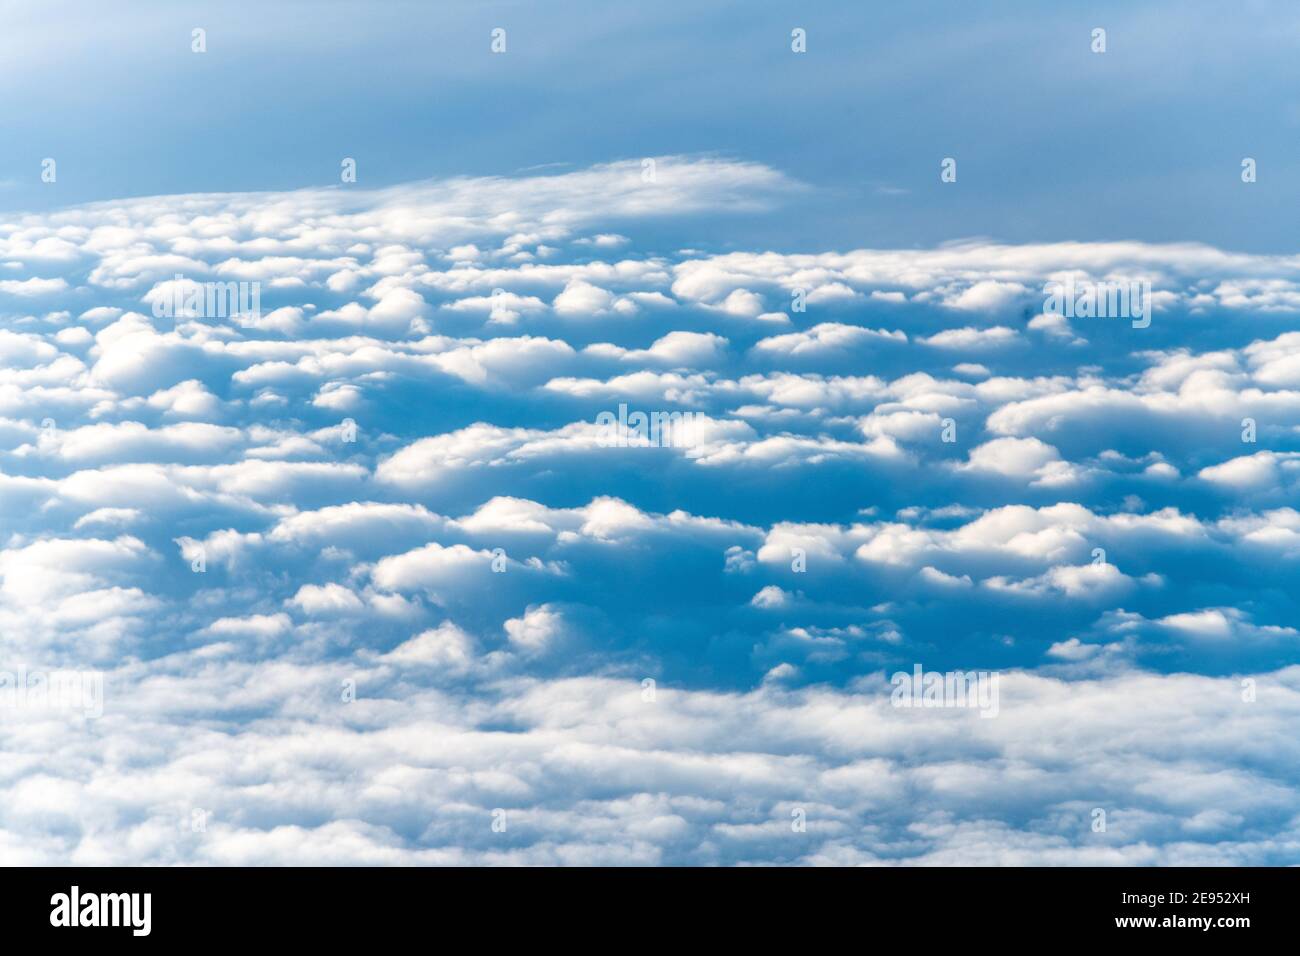 Pattern of clouds seen from a high angle view Stock Photo